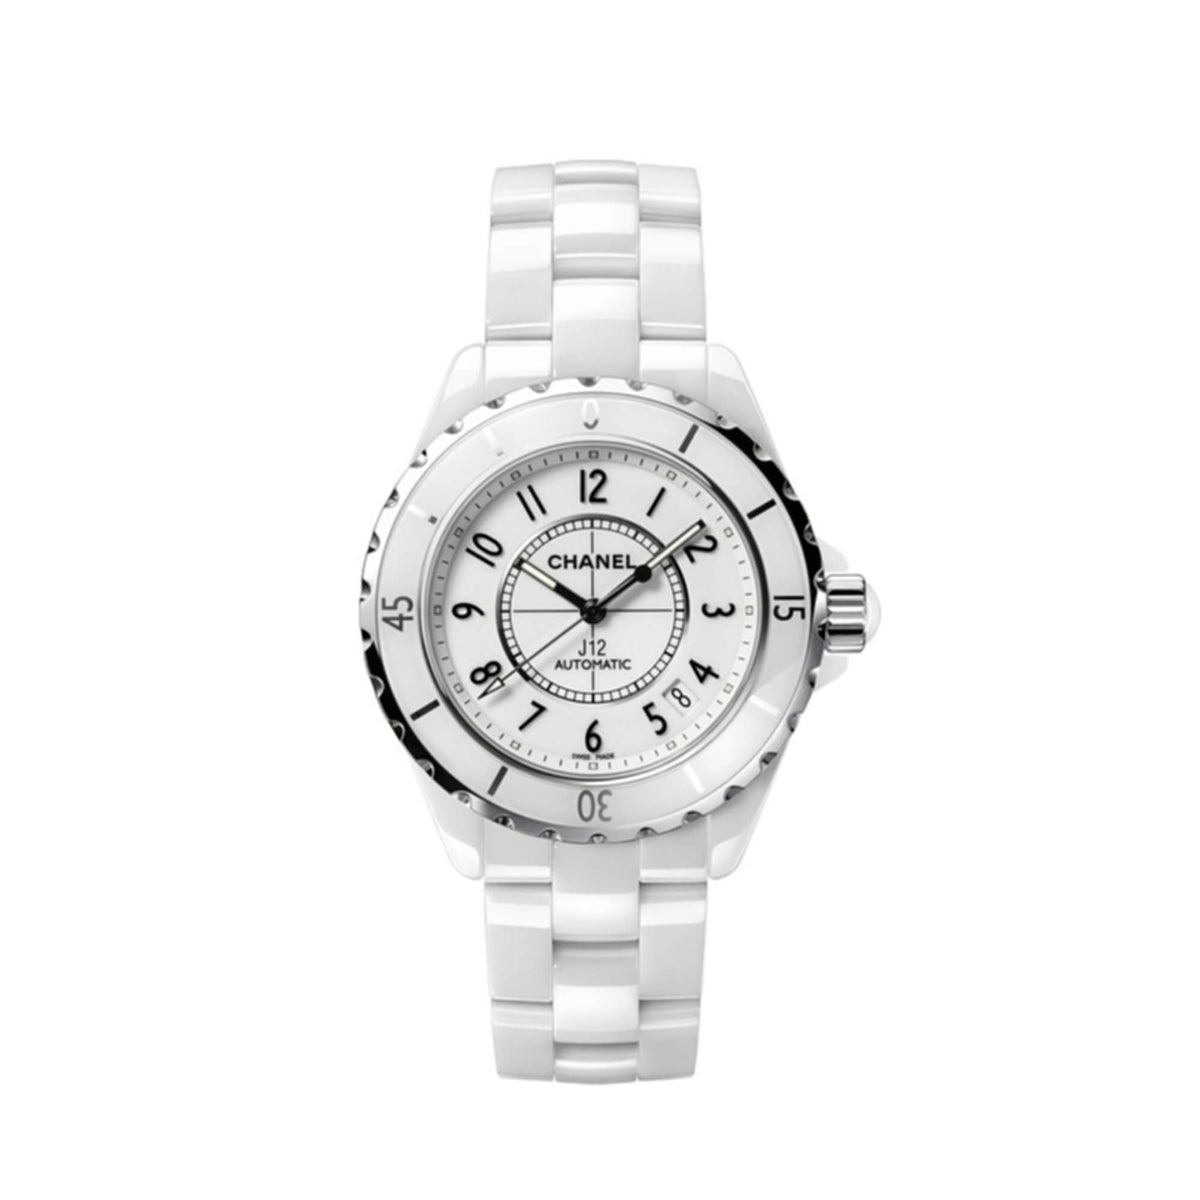 Chanel - CHANEL STAINLESS STEEL 38MM J12 AUTOMATIC WHITE CERAMIC WATCH